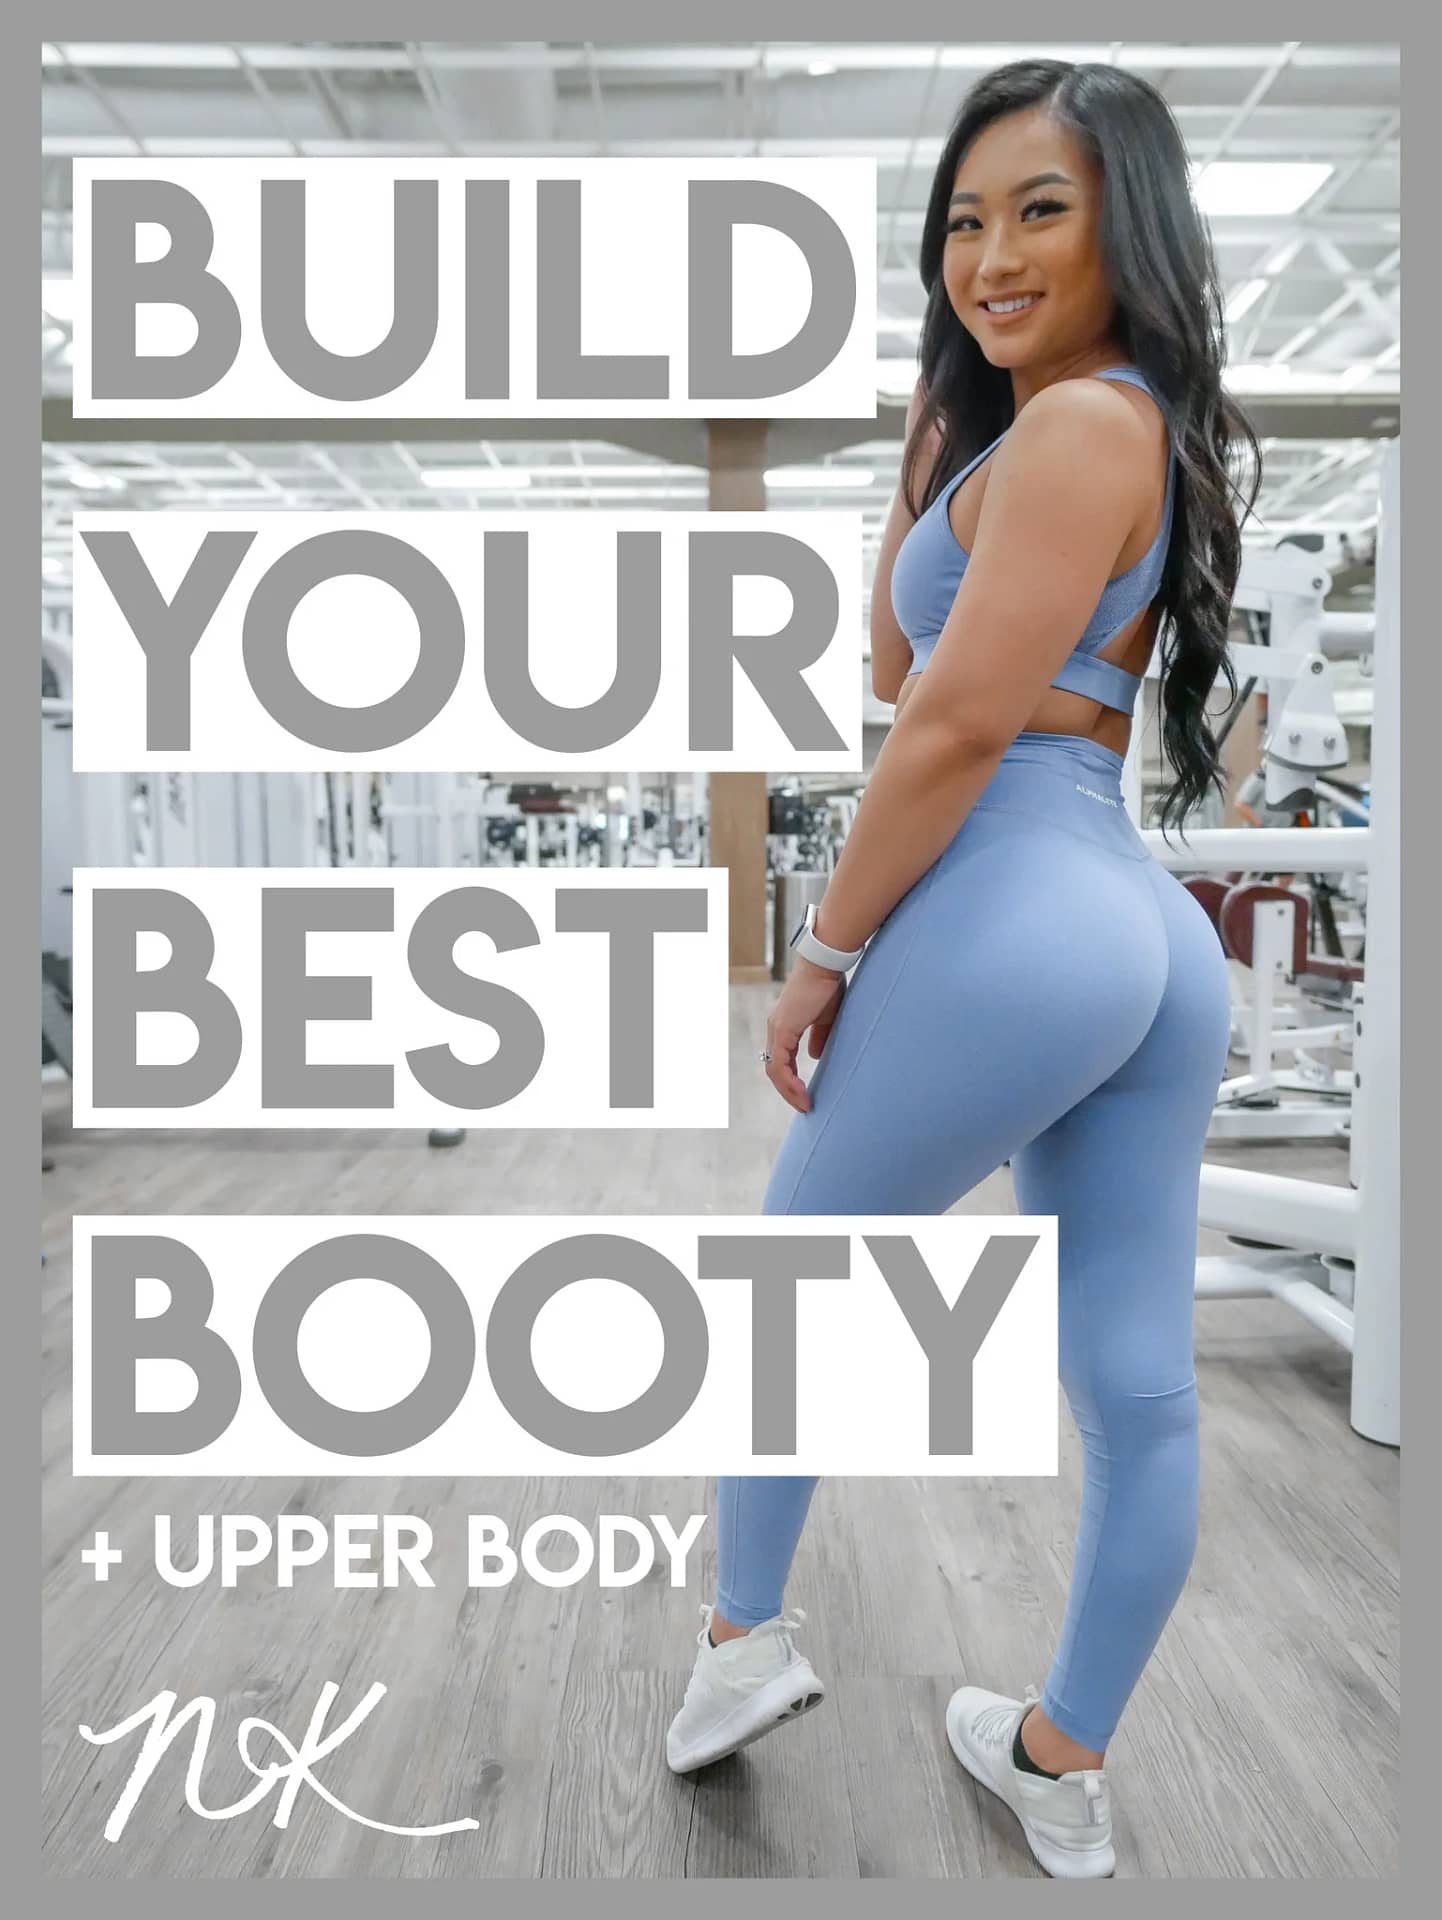 Build_Your_Best_Booty_Upper_Body_Workout_Guide_Cover_1024x1024@2x